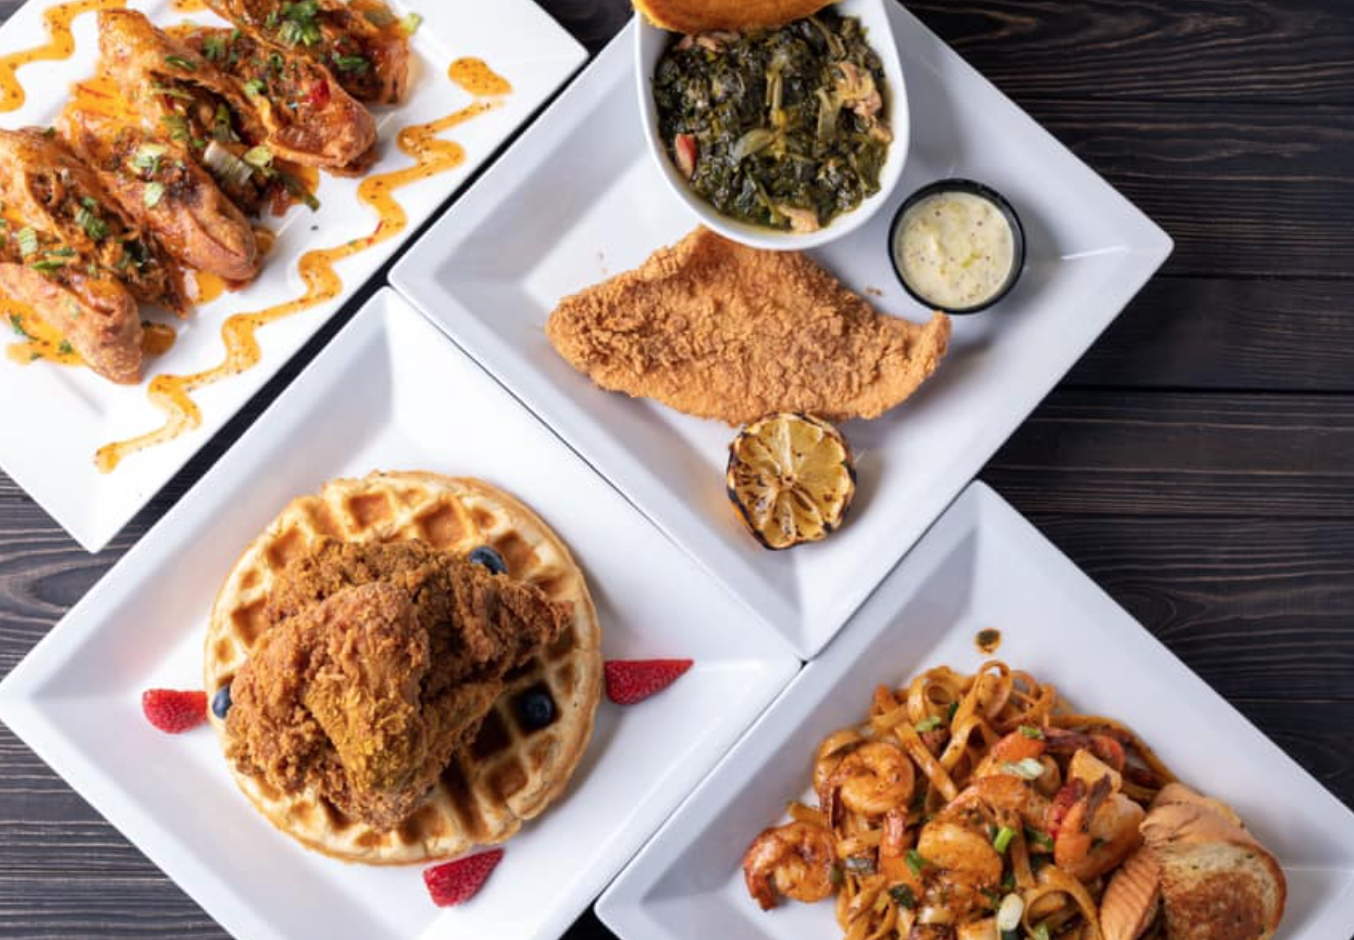 Soul Food Feast in the East: 5 Places to get Soul Food from in East Memphis